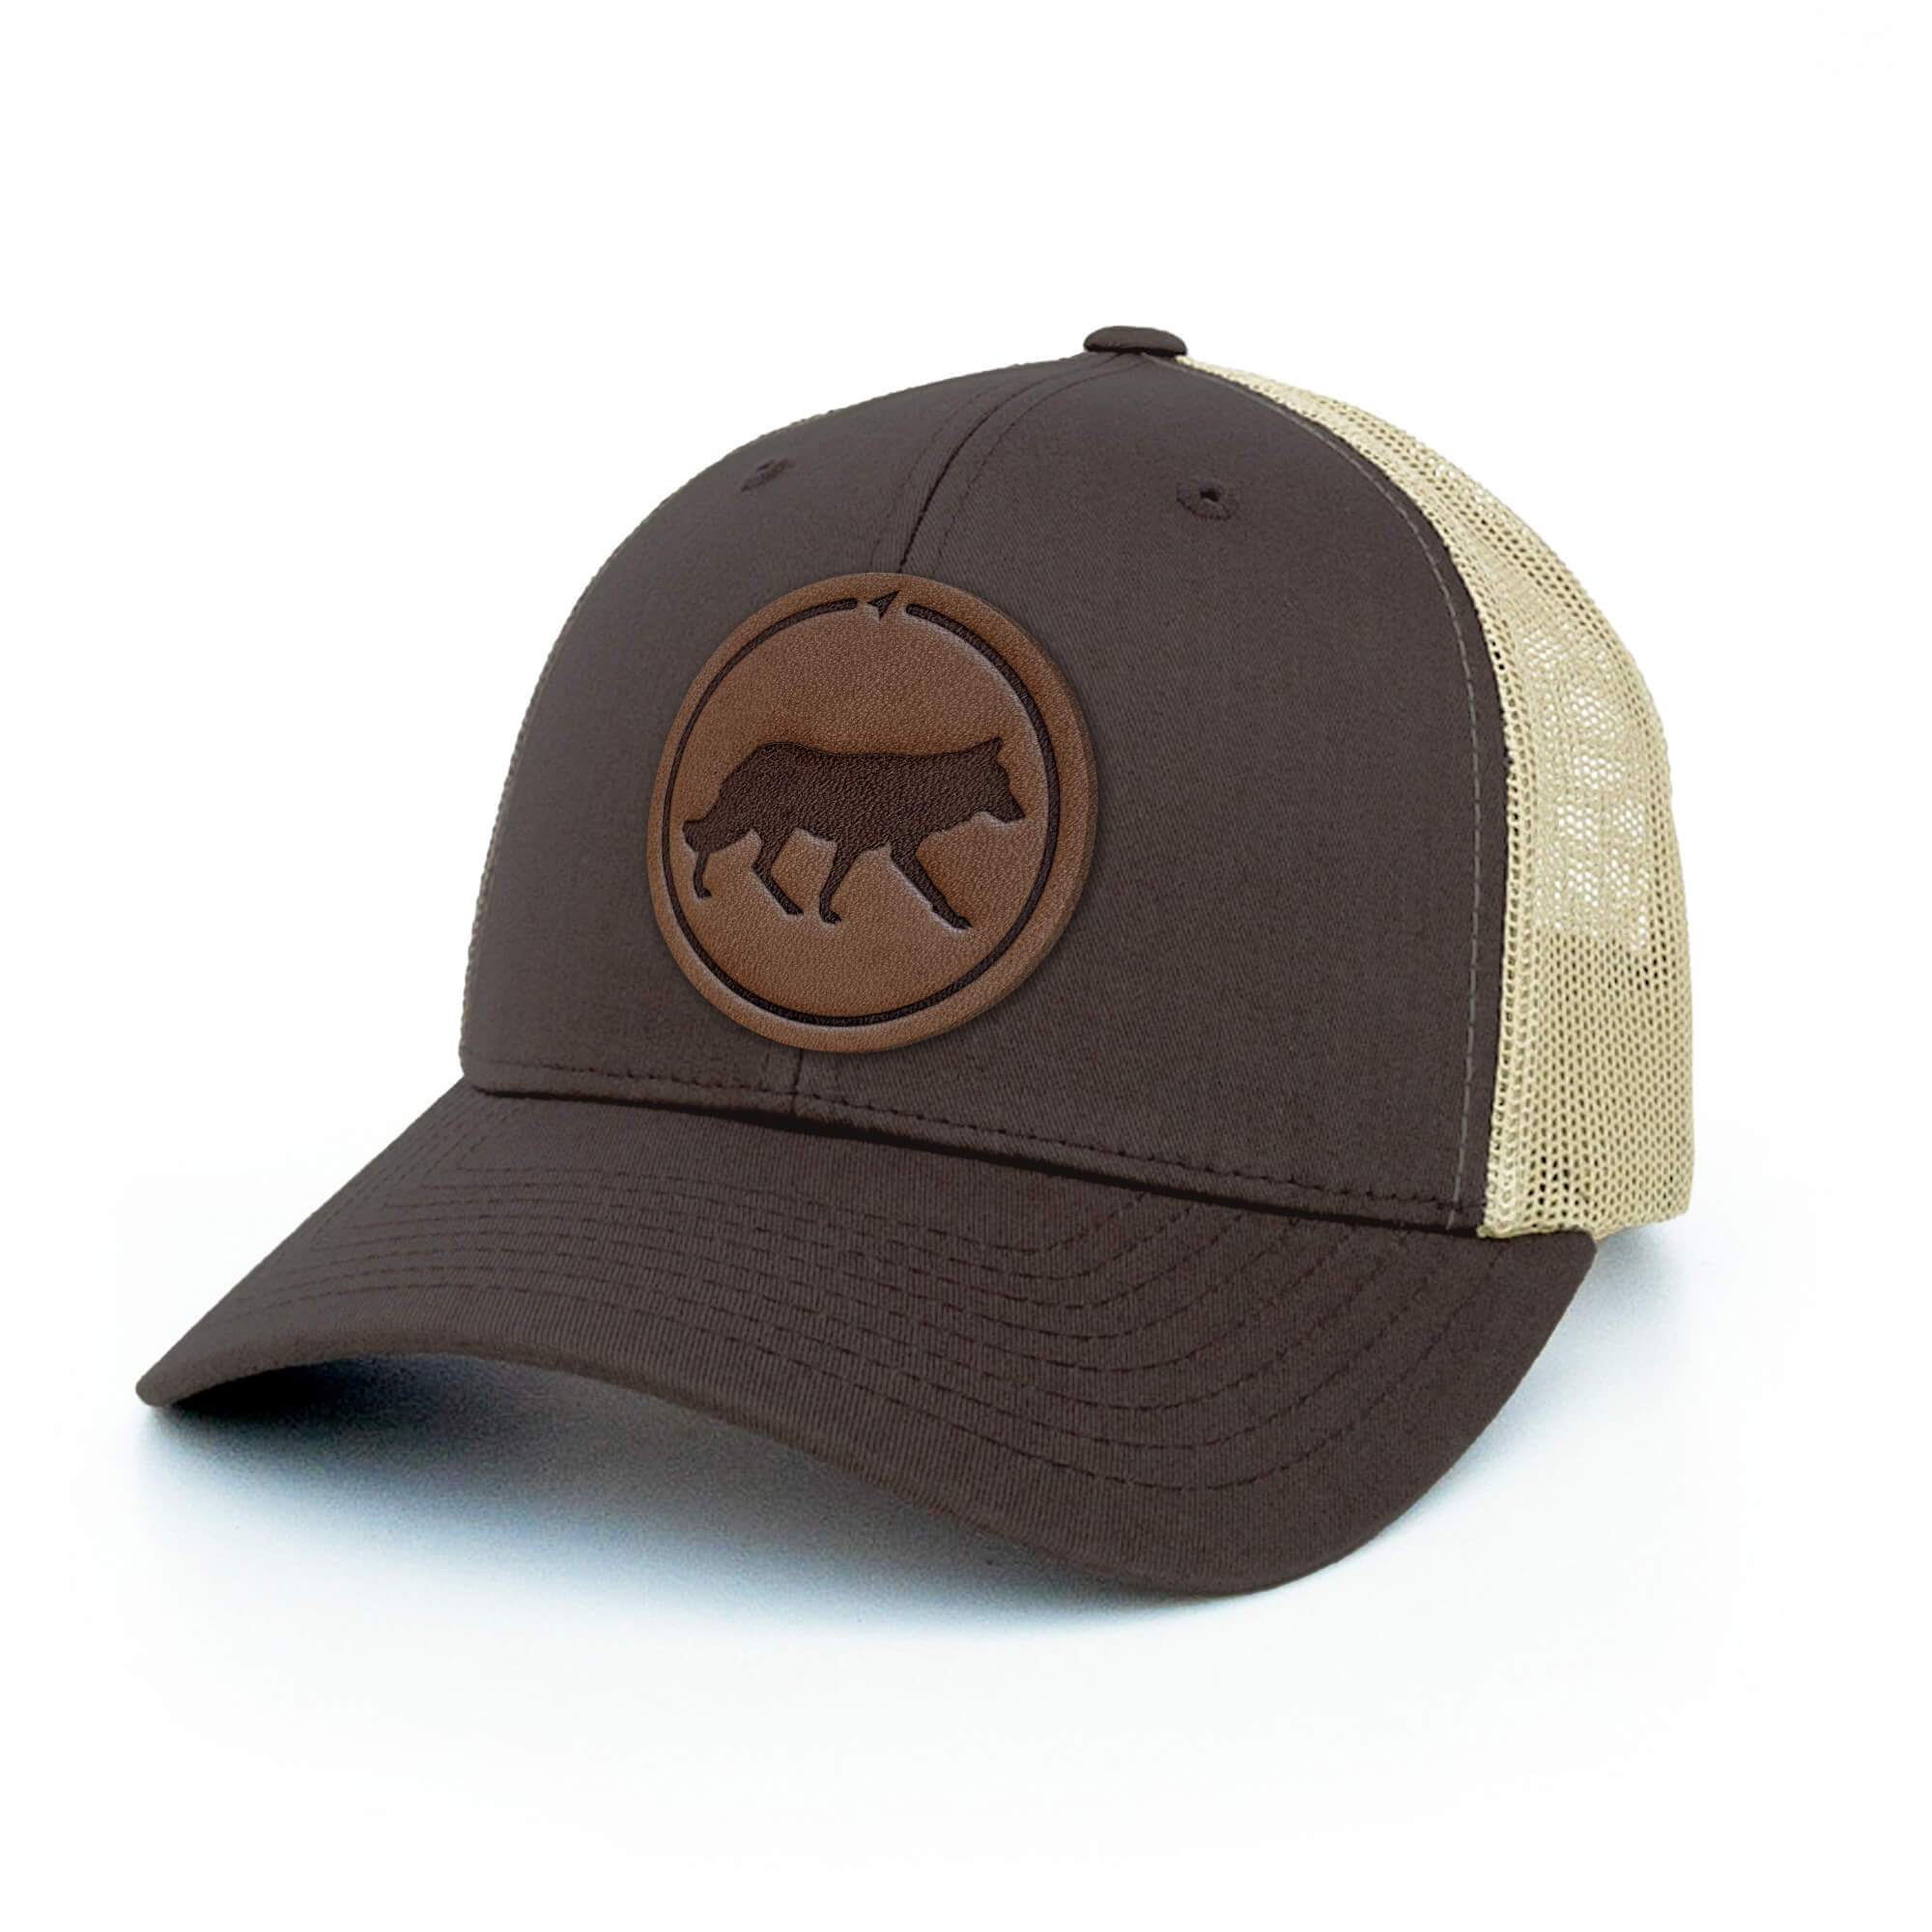 Brown and Khaki trucker hat with full-grain leather patch of Wolf | BLACK-004-007, CHARC-004-007, NAVY-004-007, HGREY-004-007, MOSS-004-007, BROWN-004-007  Edit alt text